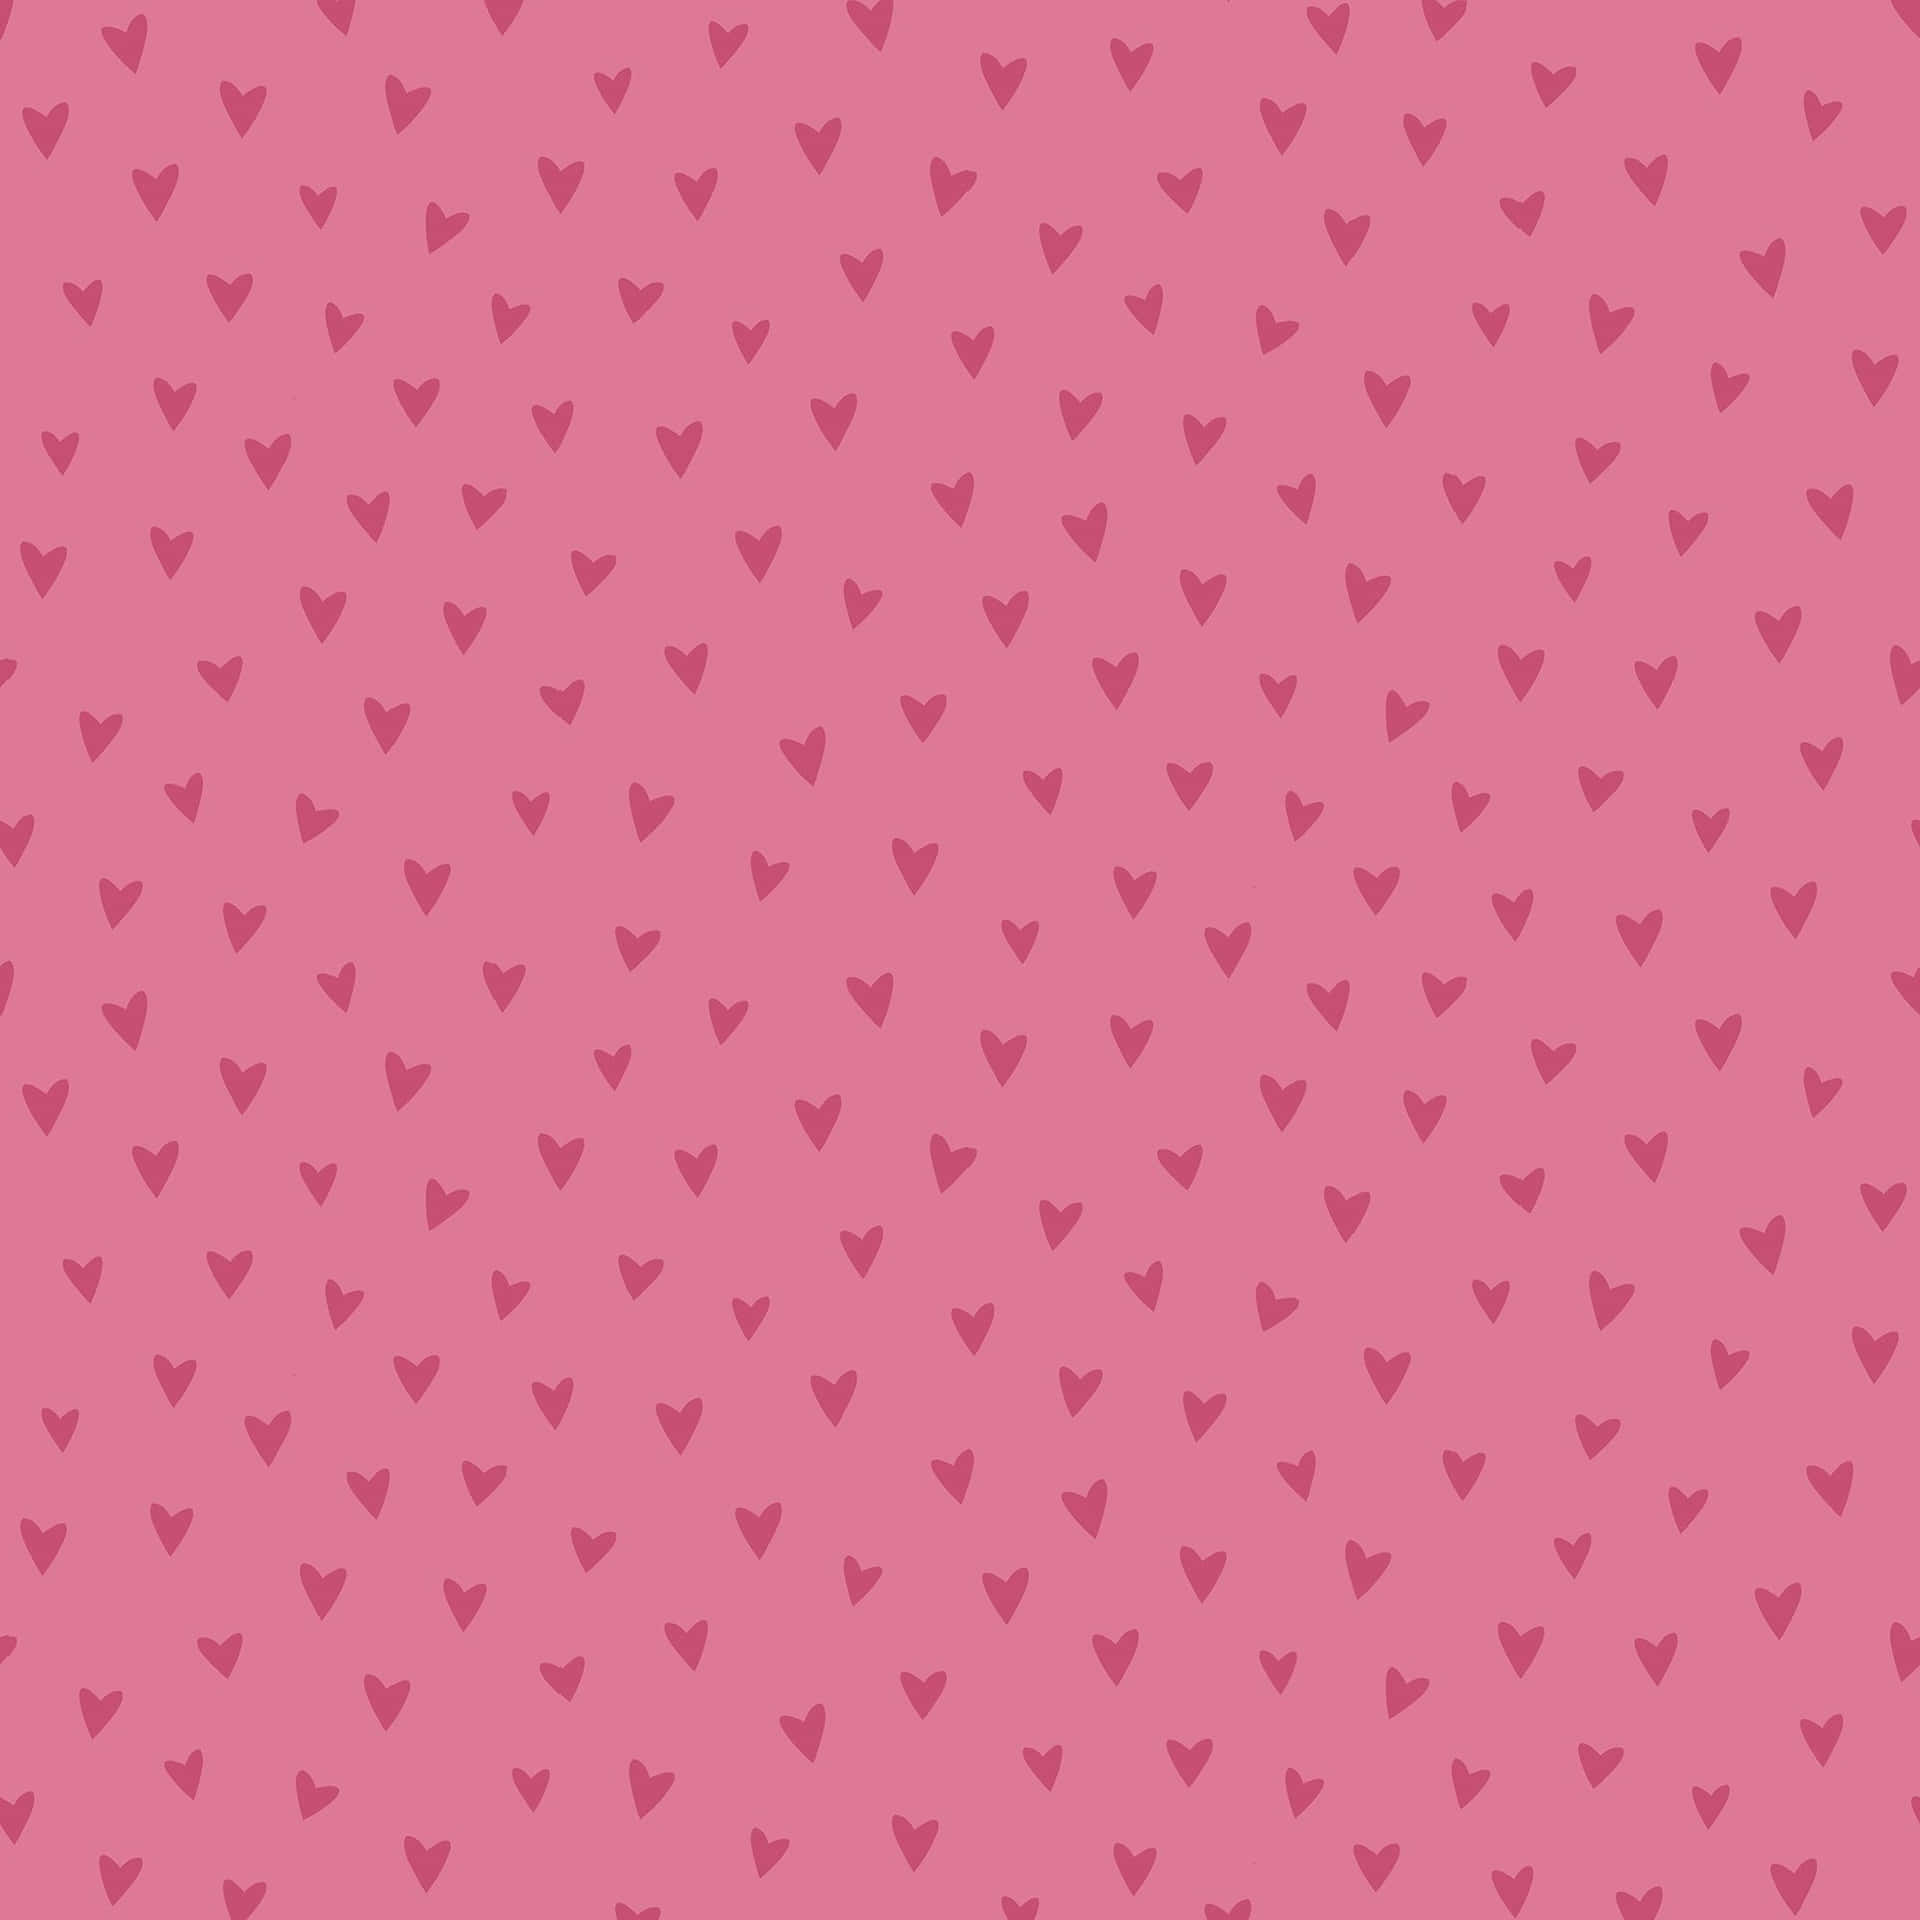 A Pink Background With Hearts On It Wallpaper